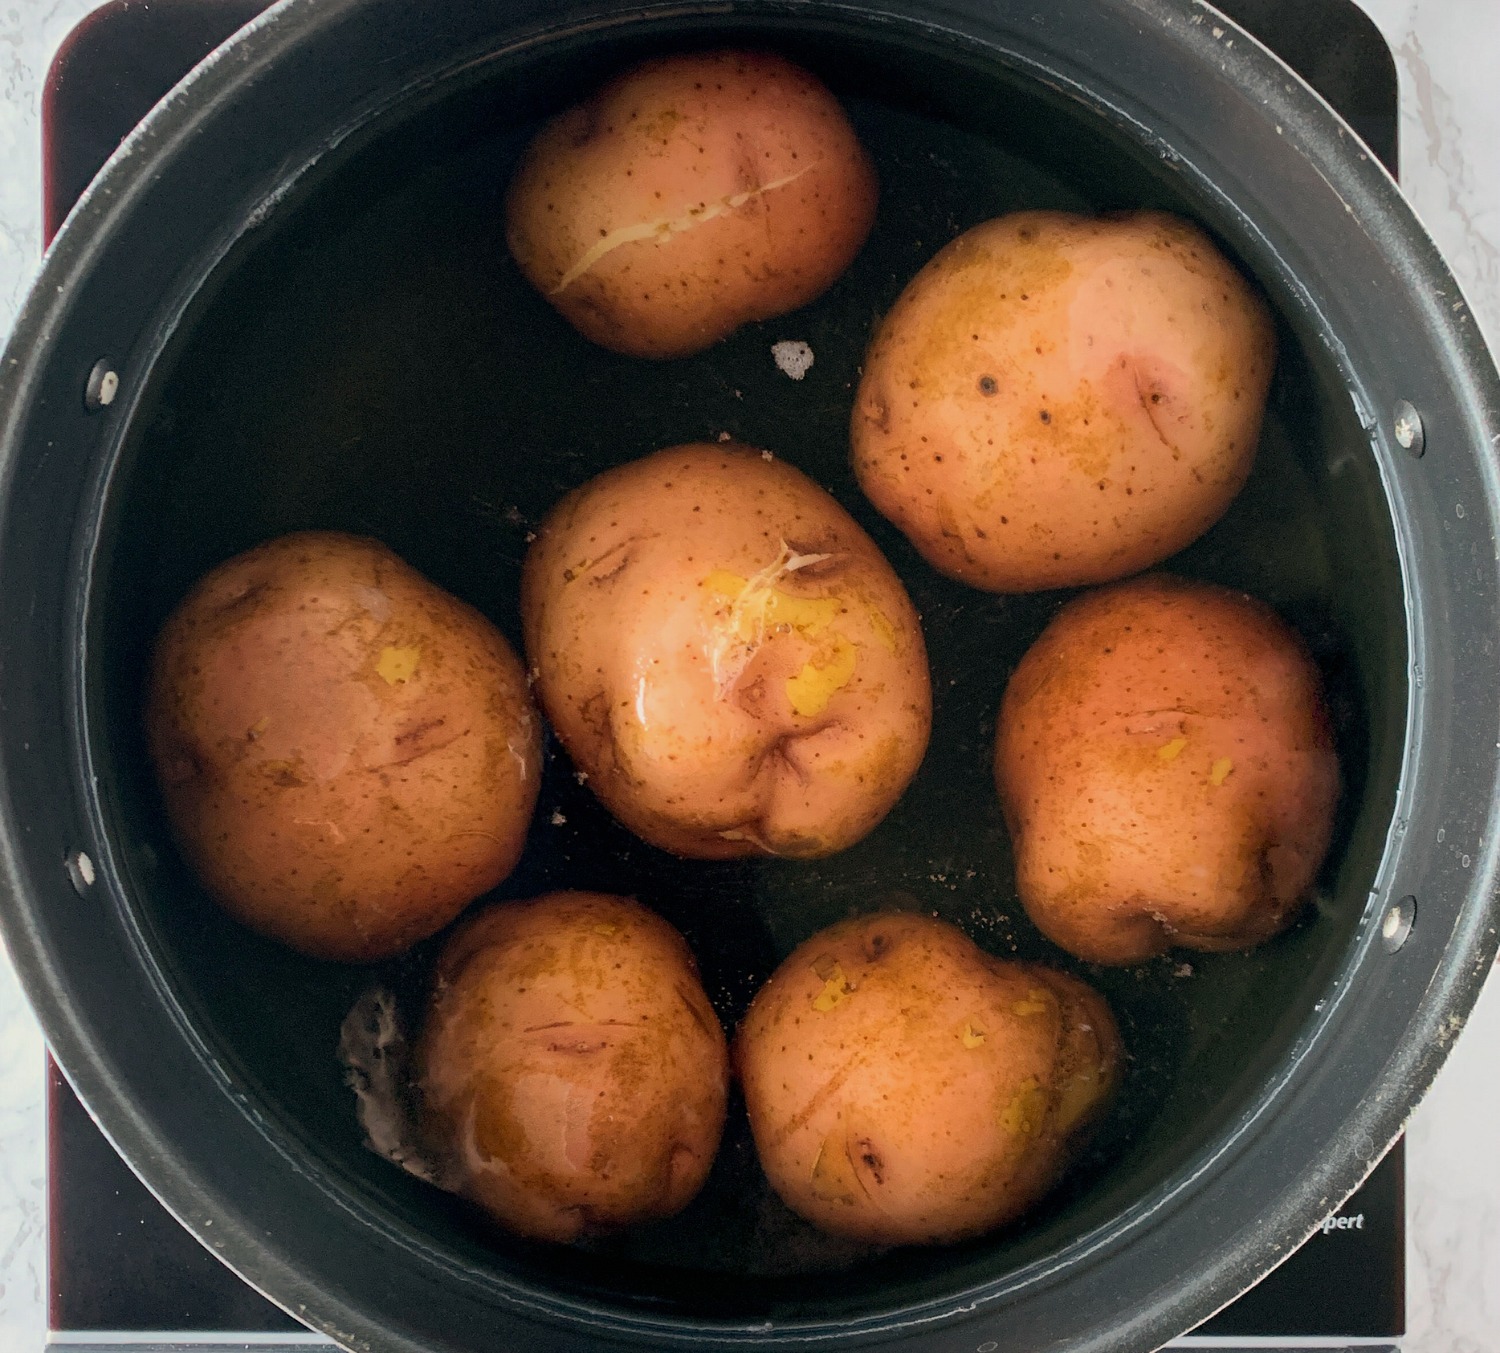 boil the red potatoes